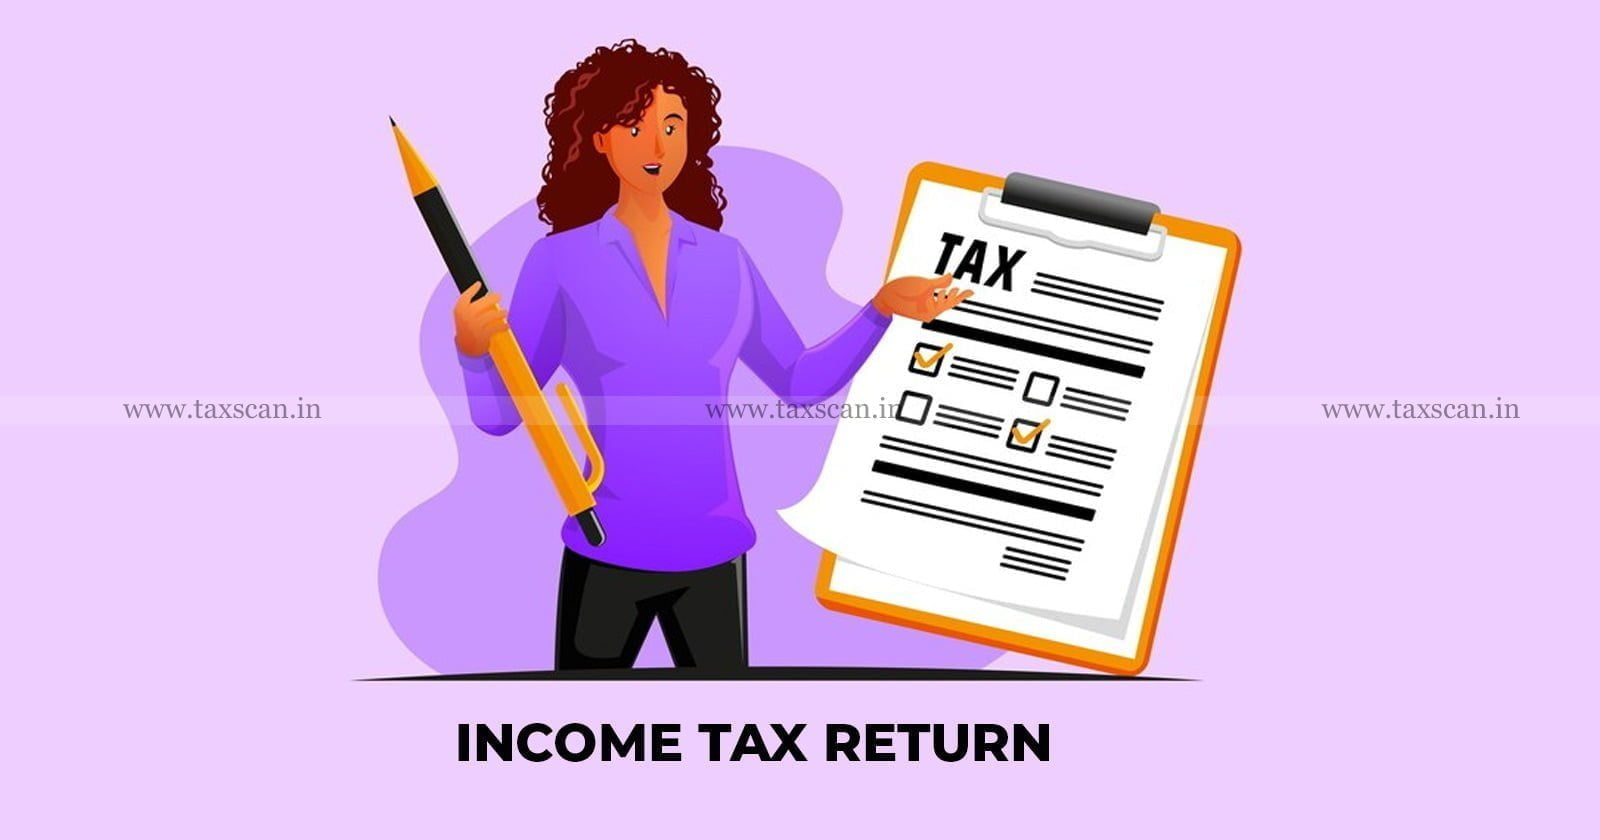 Claim of Deduction - Income Tax Act - Delay in Filing Income Tax Returns - Filing Income Tax Return -Income Tax Return - ITAT Directs Re-adjudication - taxscan